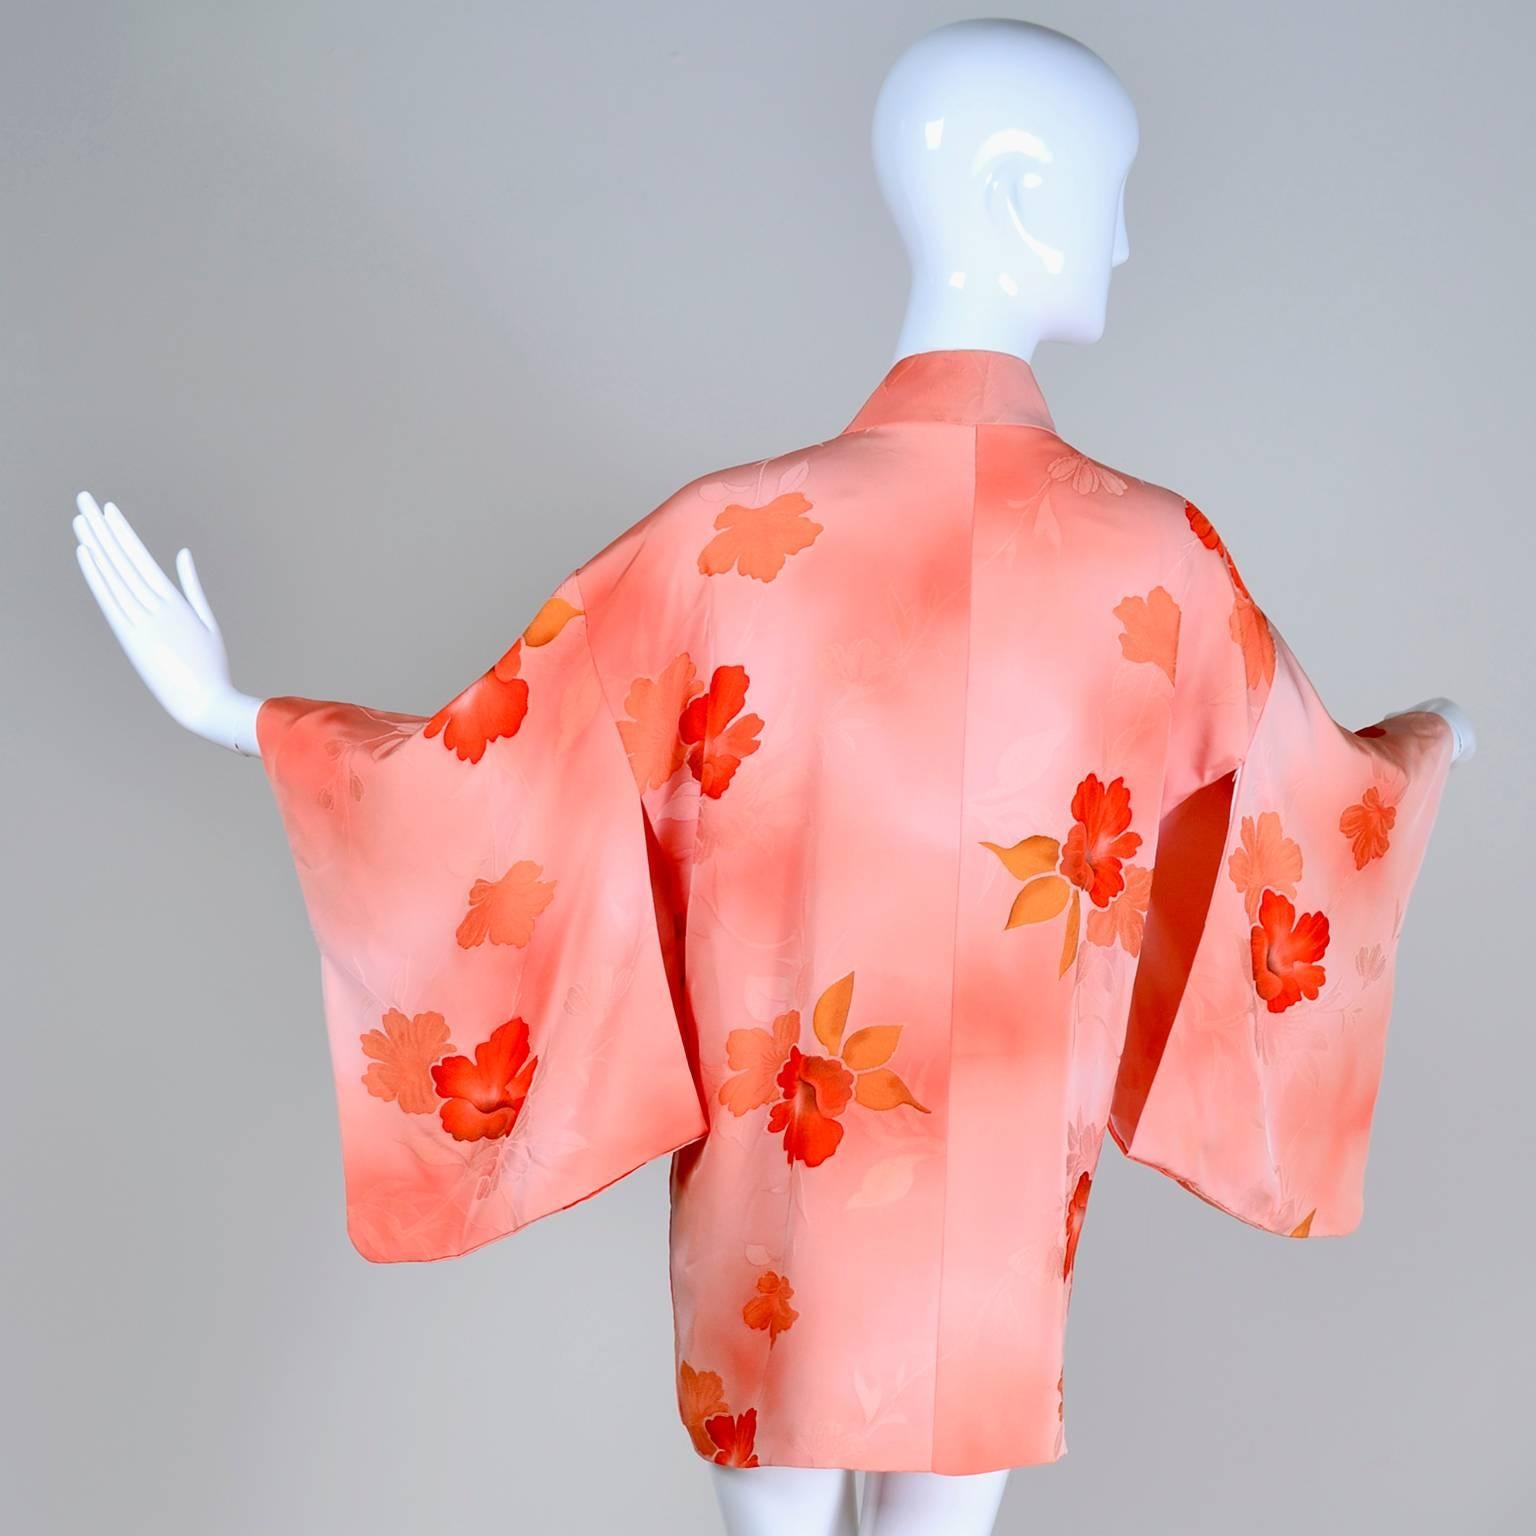 This is an exquisite vintage 1930's or early 1940's silk Haori style kimono in shades of peach with beautiful, bold hibiscus flowers.  This kimono is a one size fits most piece and it has inner ties for closure in the front.  This came from an